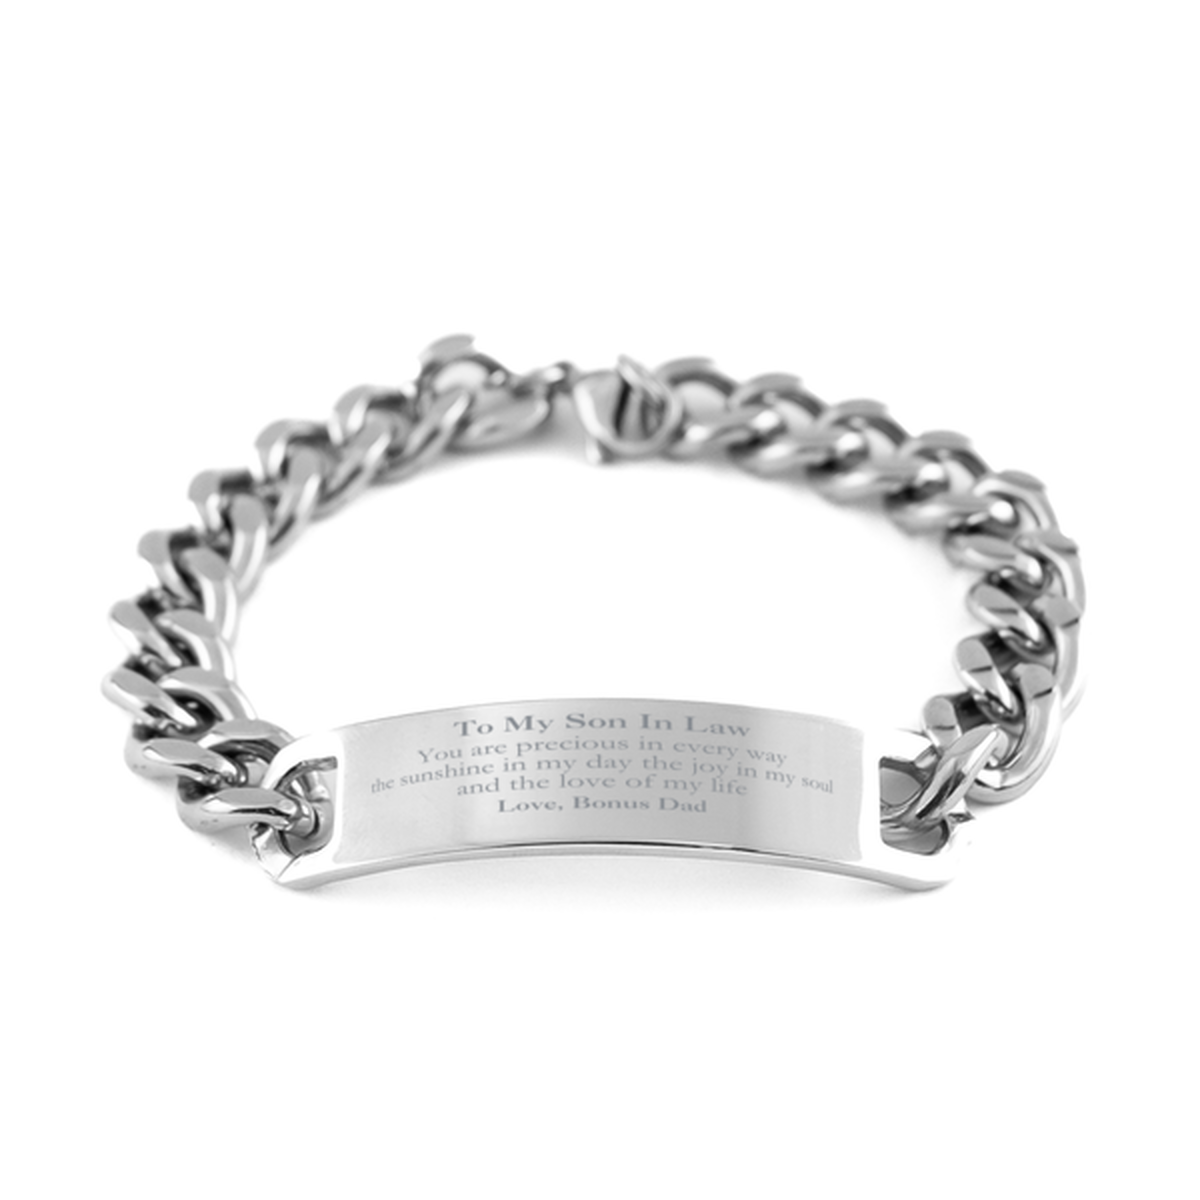 Graduation Gifts for Son In Law Cuban Chain Stainless Steel Bracelet Present from Bonus Dad, Christmas Son In Law Birthday Gifts Son In Law You are precious in every way the sunshine in my day. Love, Bonus Dad